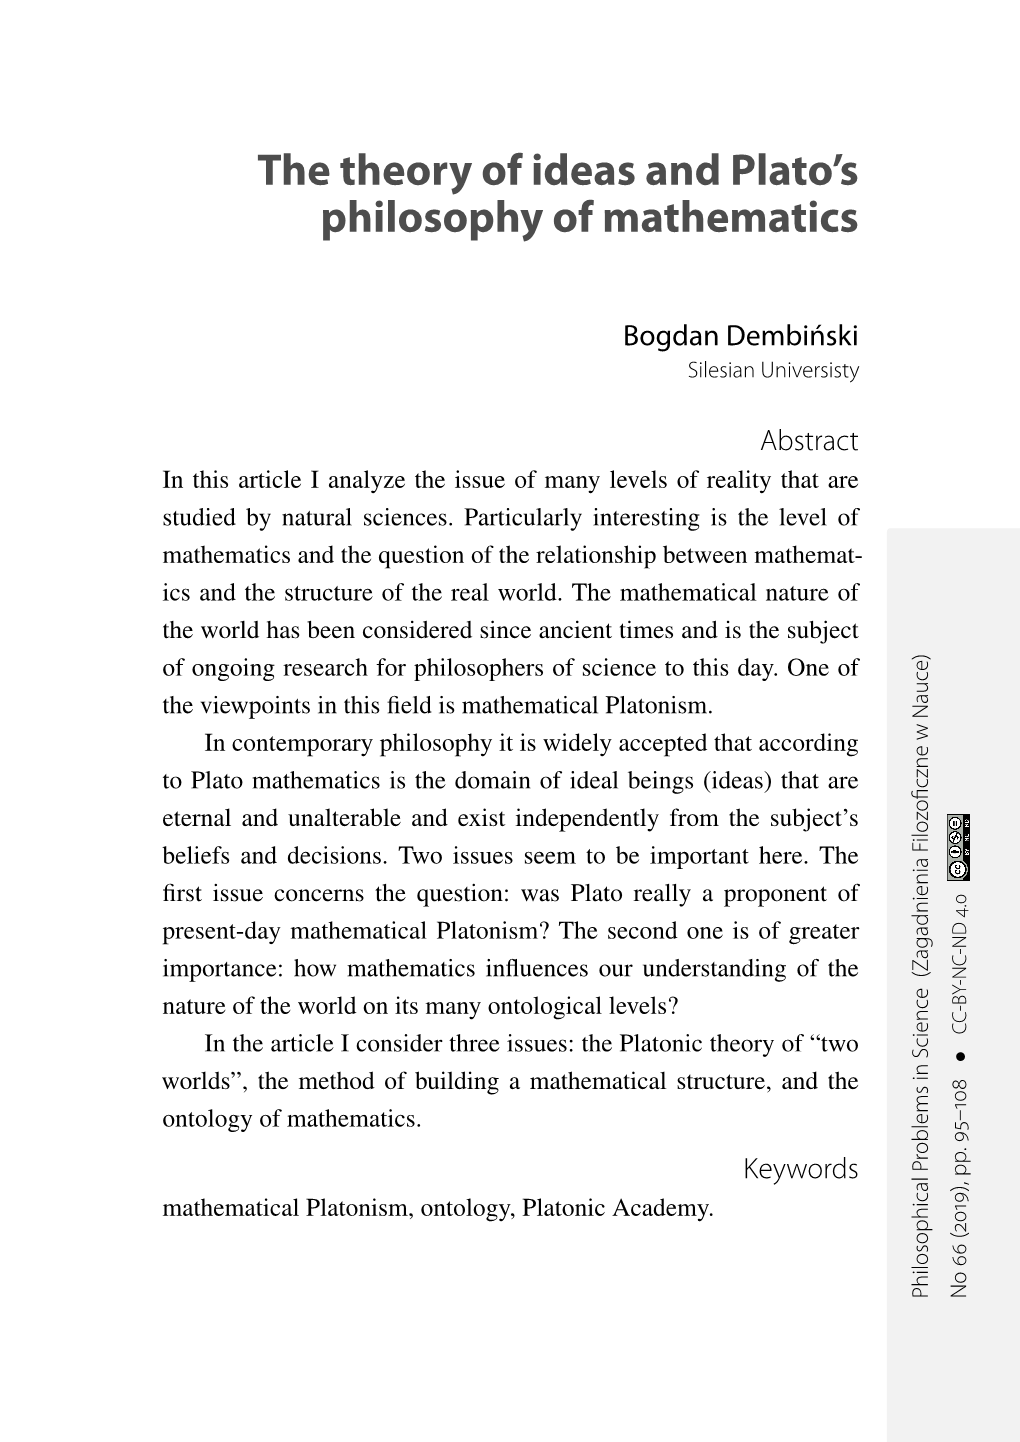 The Theory of Ideas and Plato's Philosophy of Mathematics